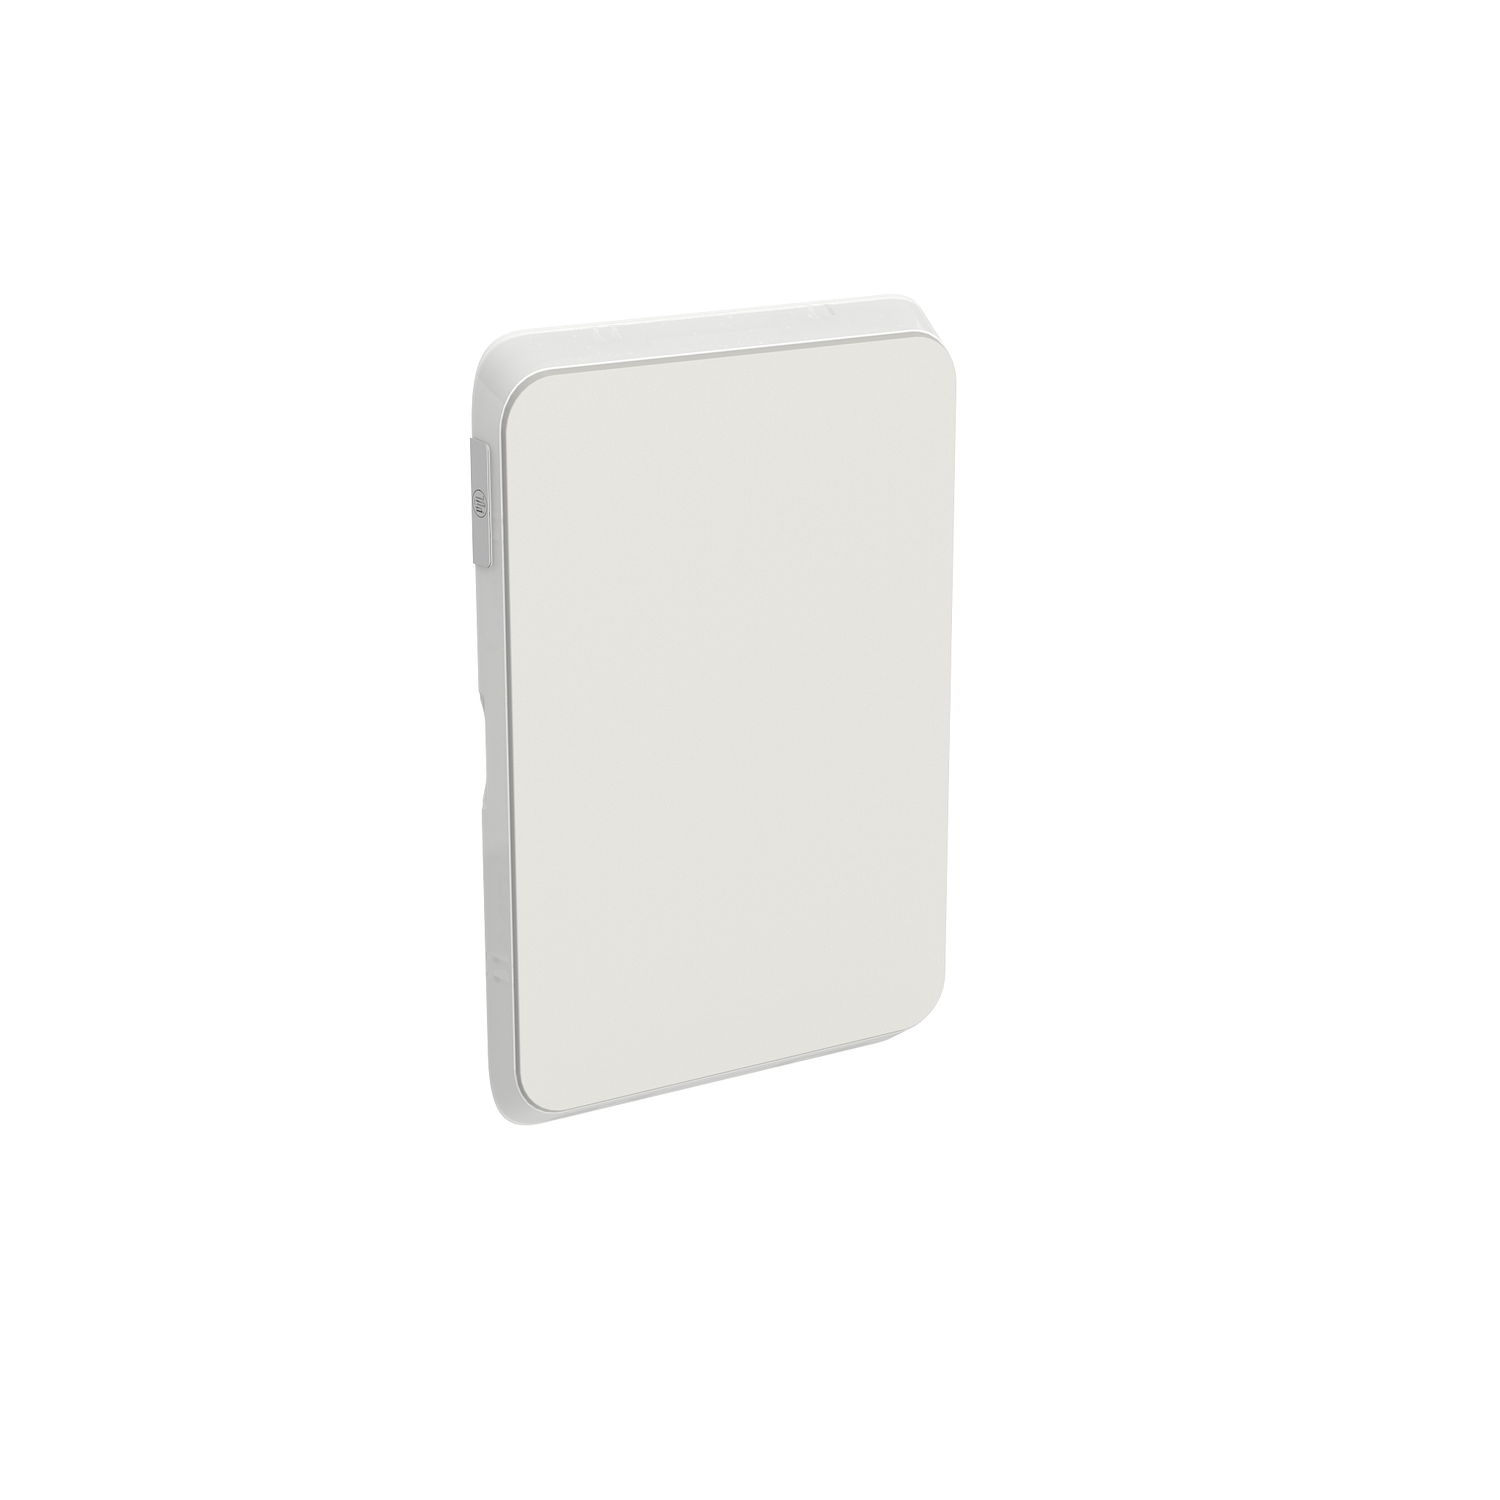 PDL Iconic - Cover Plate Blank Plate - Cool Grey